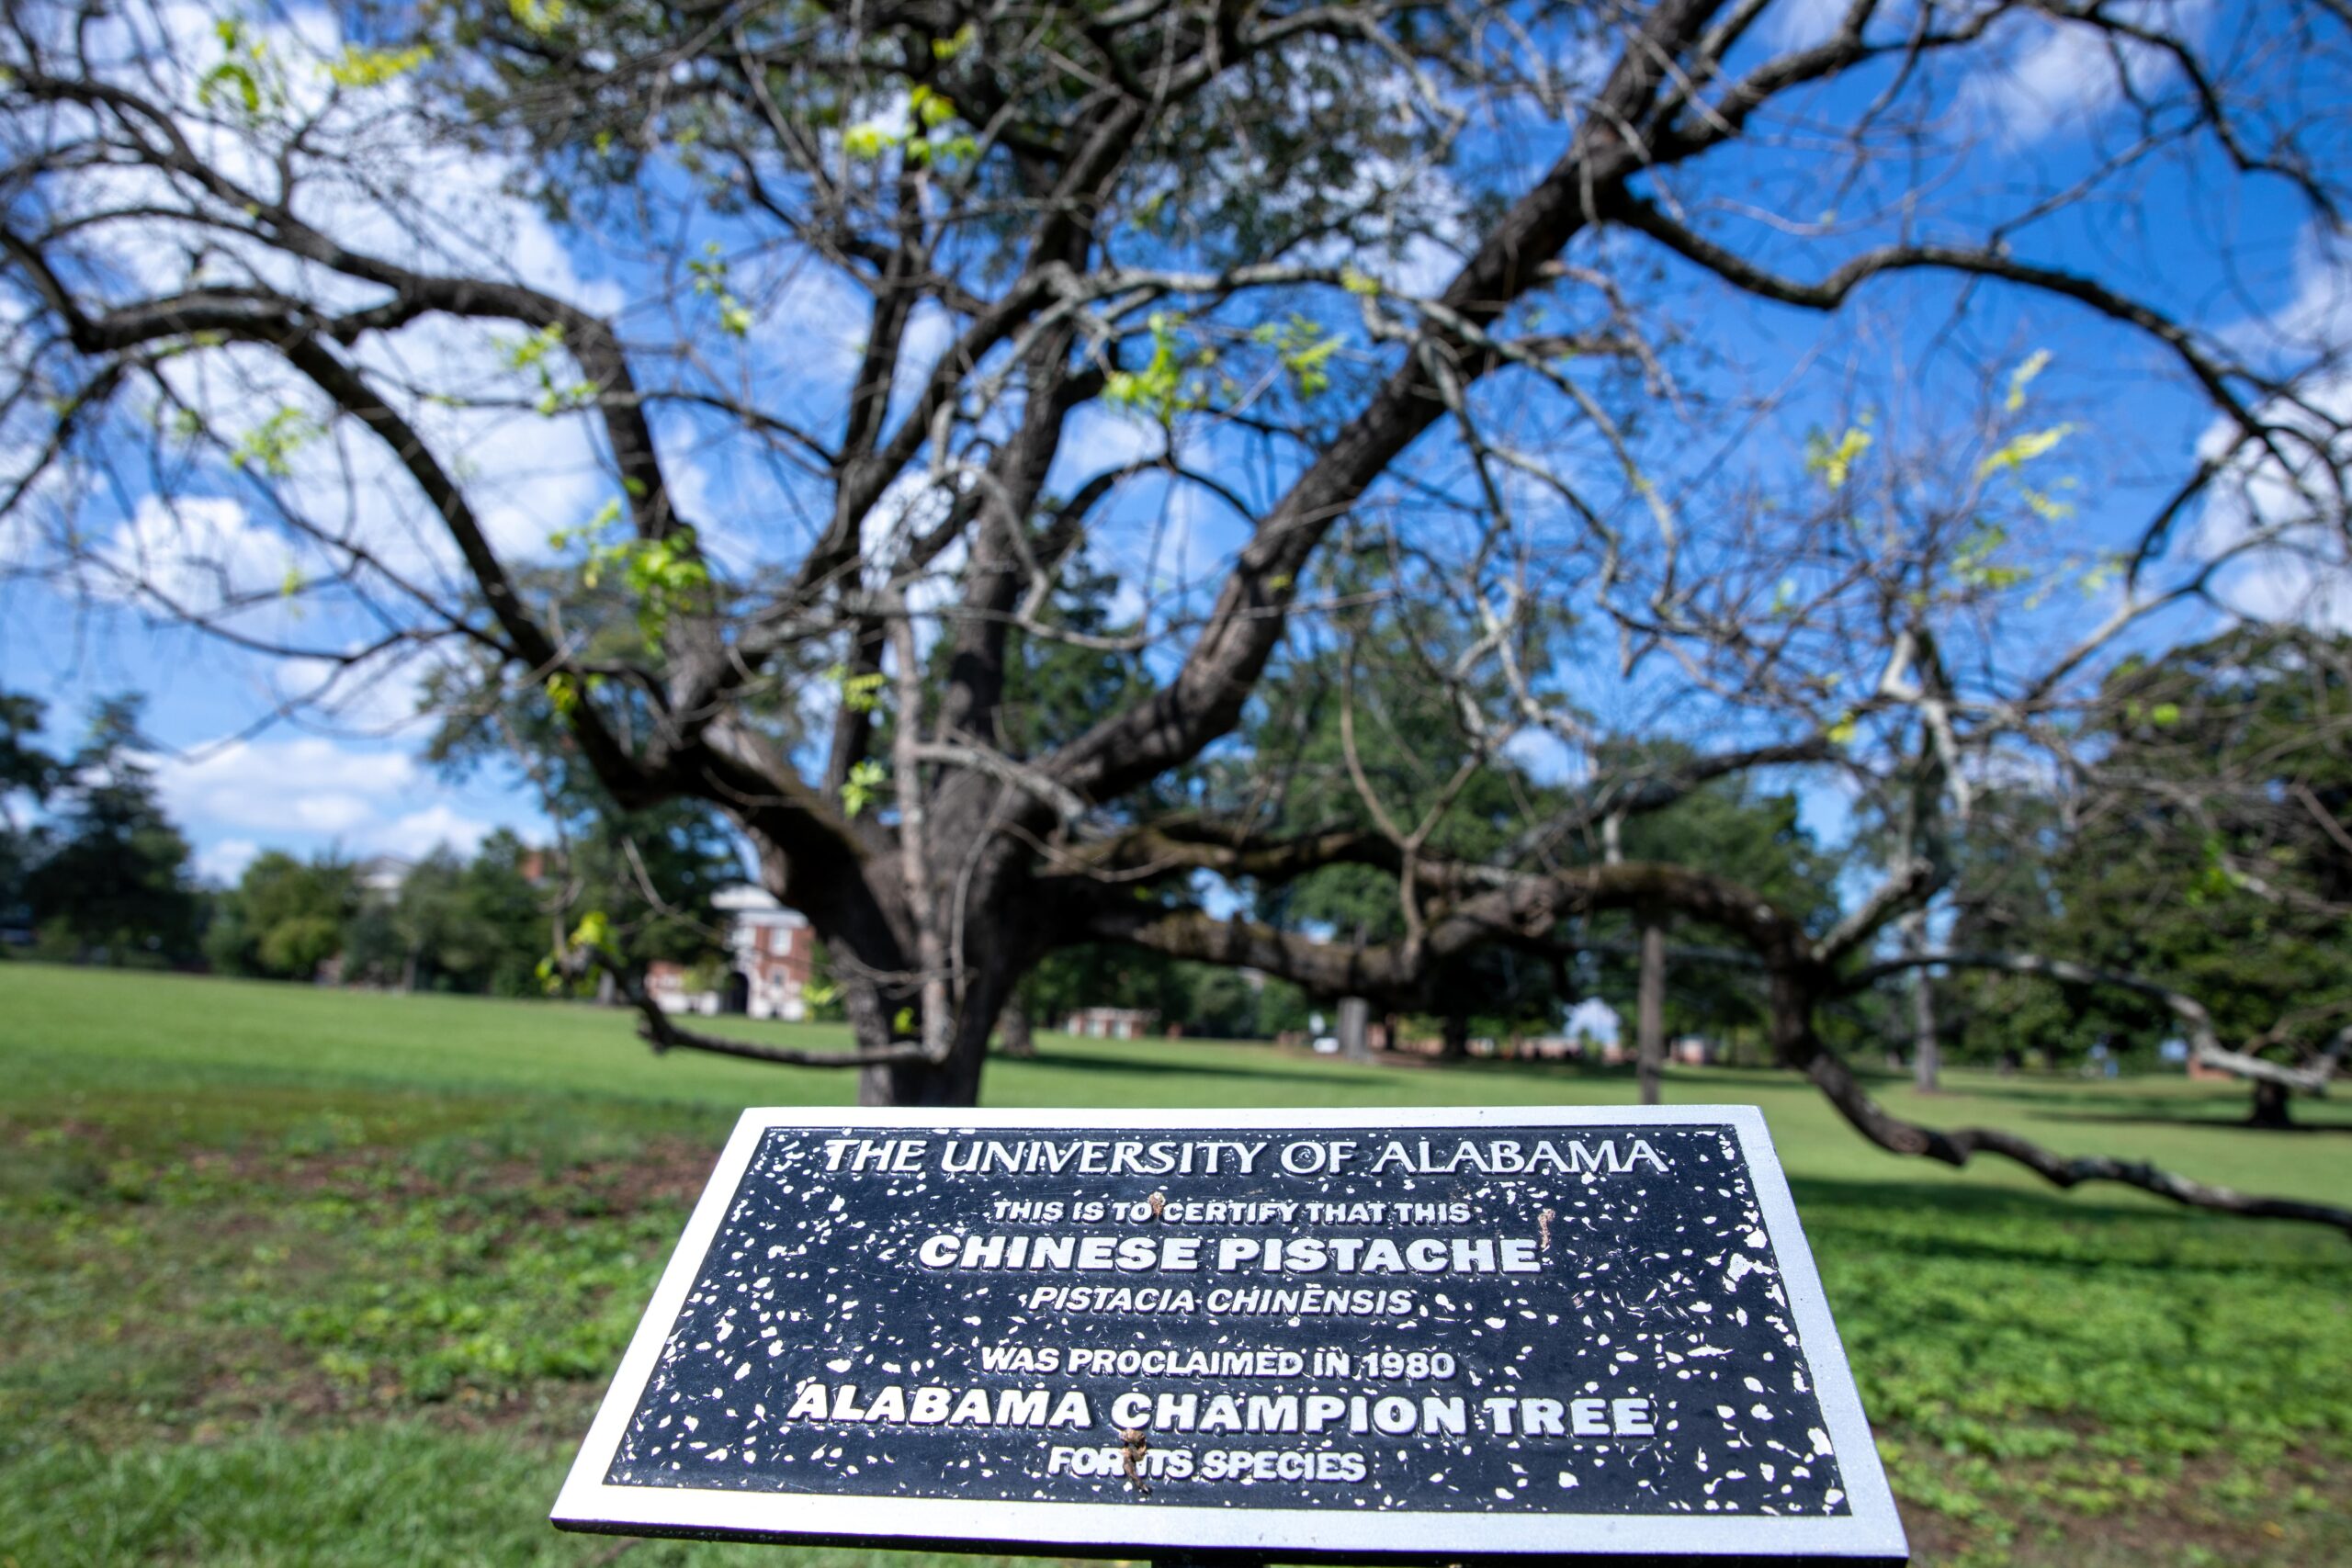 A plaque marks this Chinese pistache tree as an Alabama champion tree for its species. 